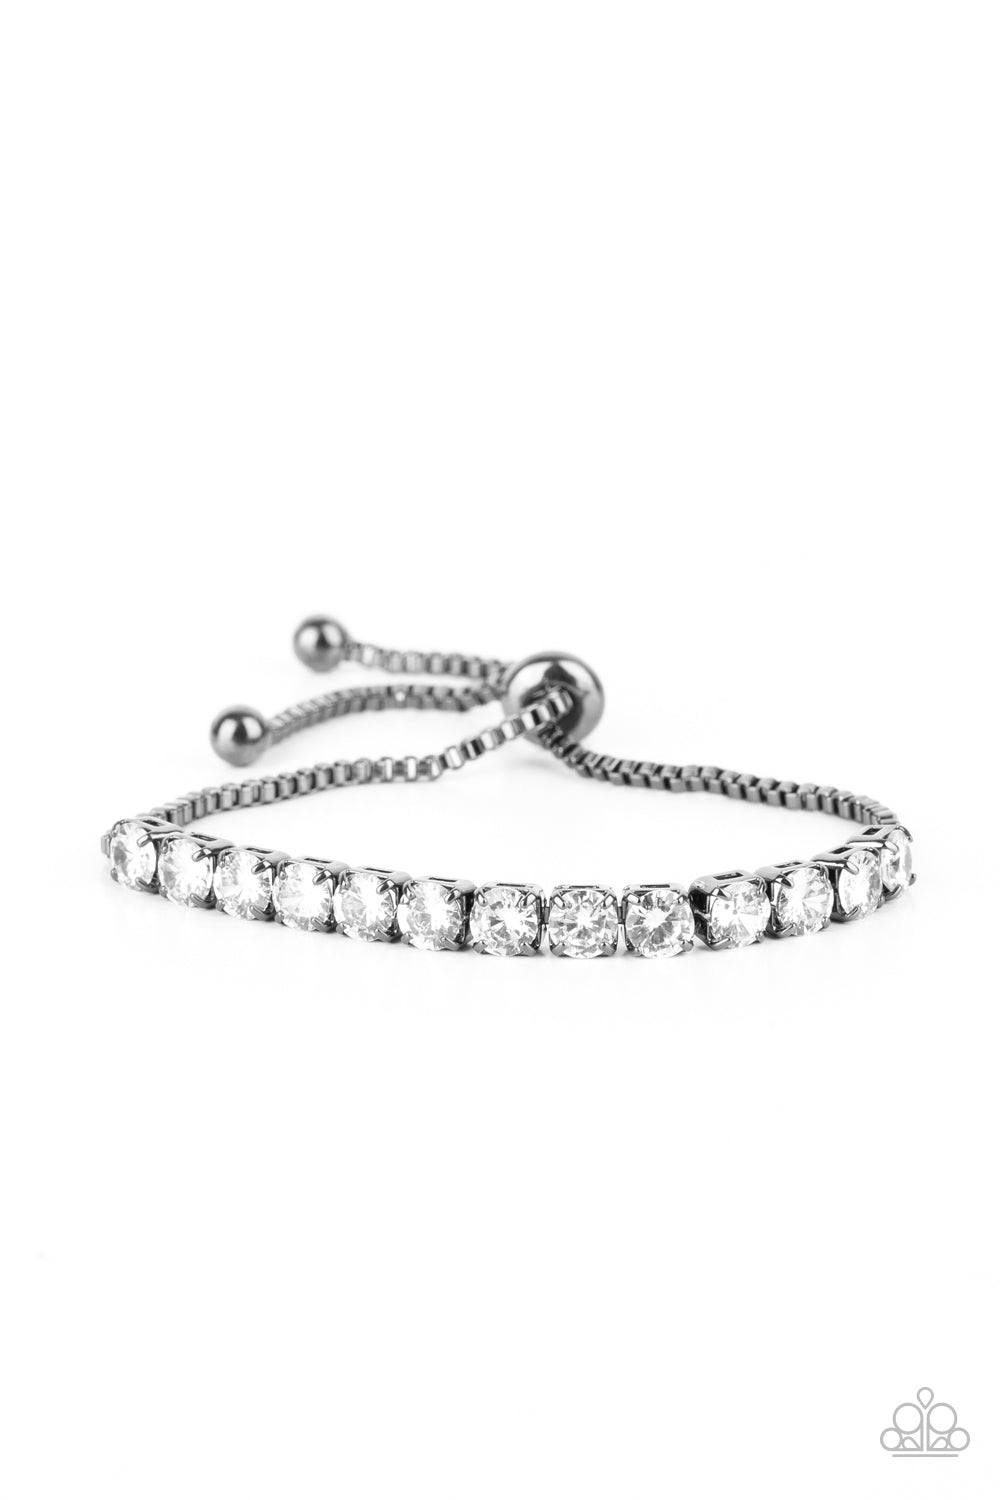 Paparazzi Red Carpet Rival - Black Bracelet - A Finishing Touch Jewelry